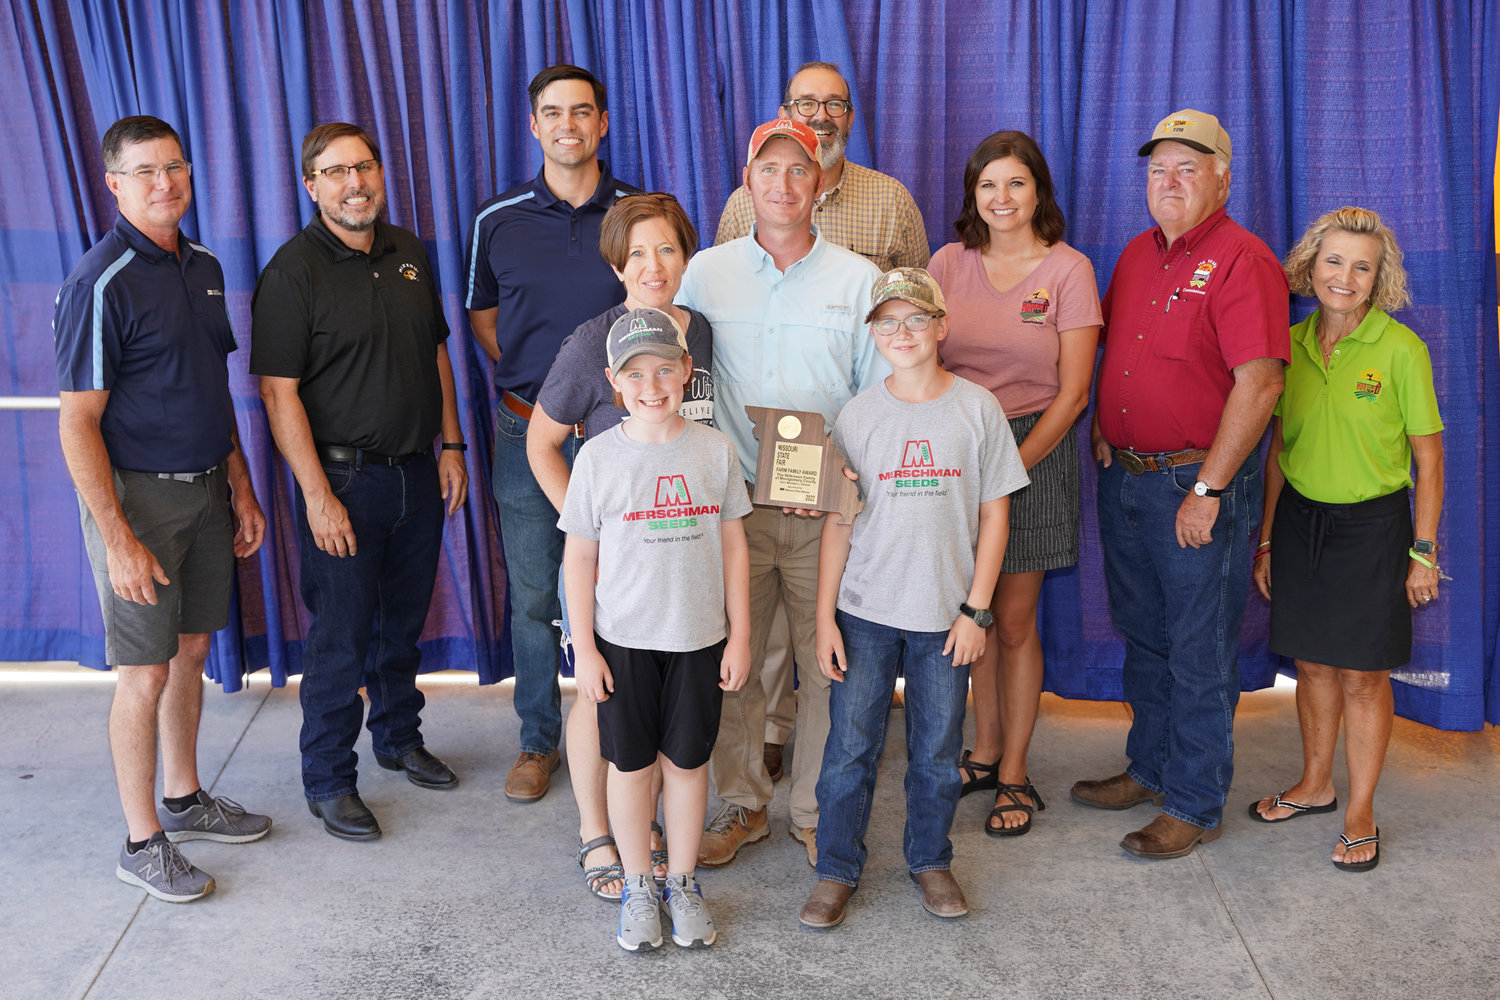 Bill and Andrea Wilkinson and their family were honored during the 64th annual Missouri Farm Family Day on Aug. 15 at the Missouri State Fair. Pictured, front row from left, Liam and Royce Wilkinson. Second row are Andrea and Bill Wilkinson. Back row are Todd Hayes, Missouri Farm Bureau; Rob Kallenbach; Missouri State Fair Commissioner Byron Roach; Blake Rollins, Missouri Farm Bureau; Chad Higgins; Missouri State Fair Commissioner Jamie Johansen; Missouri State Fair Commissioner Ted Sheppard; and Missouri State Fair Commissioner Sherry Jones.